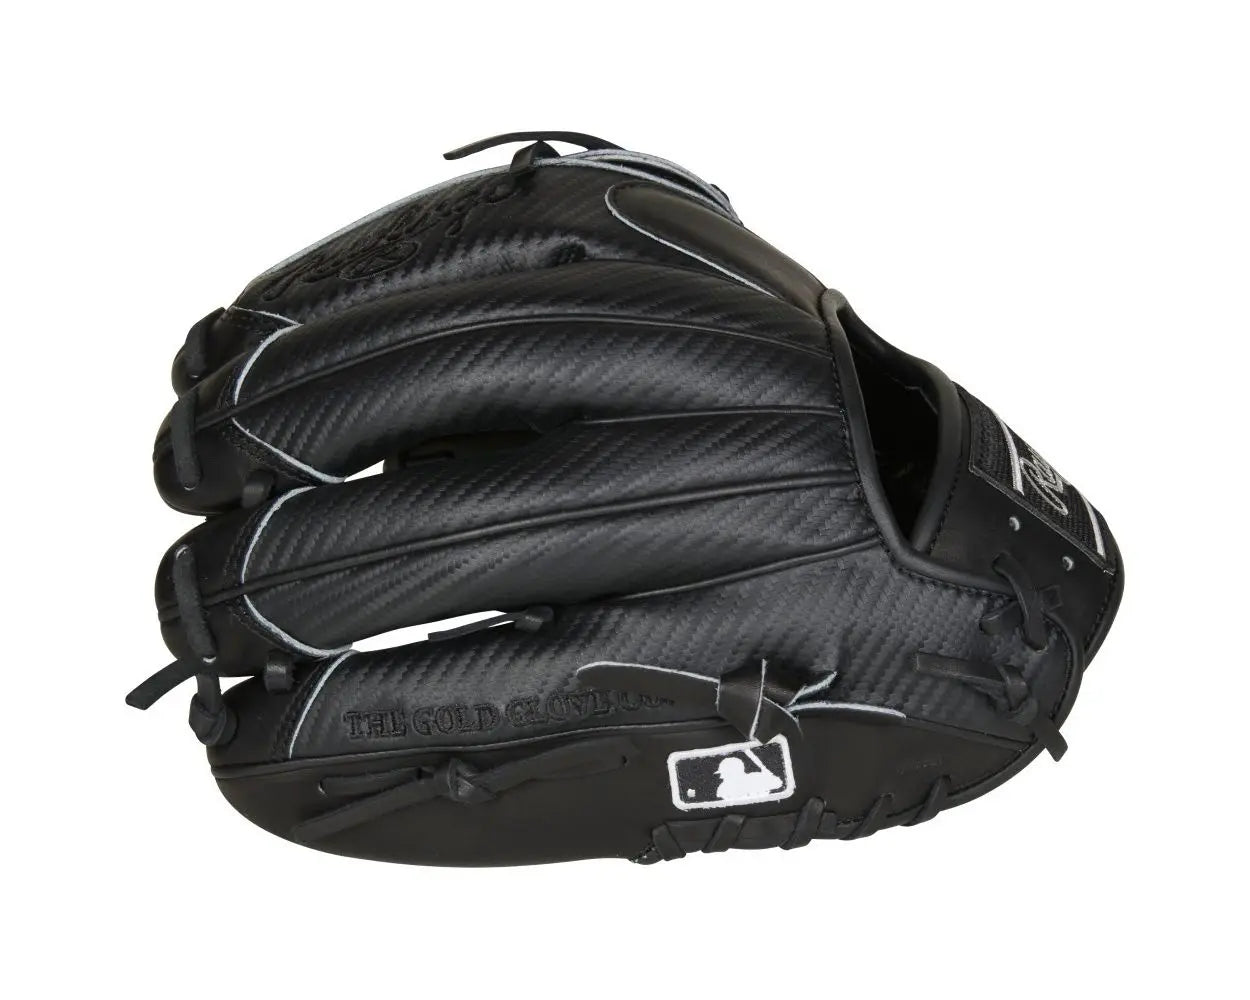 RAWLINGS HEART OF THE HIDE HYPER SHELL INFIELD/PITCHER'S GLOVE: PRO205-9BCF